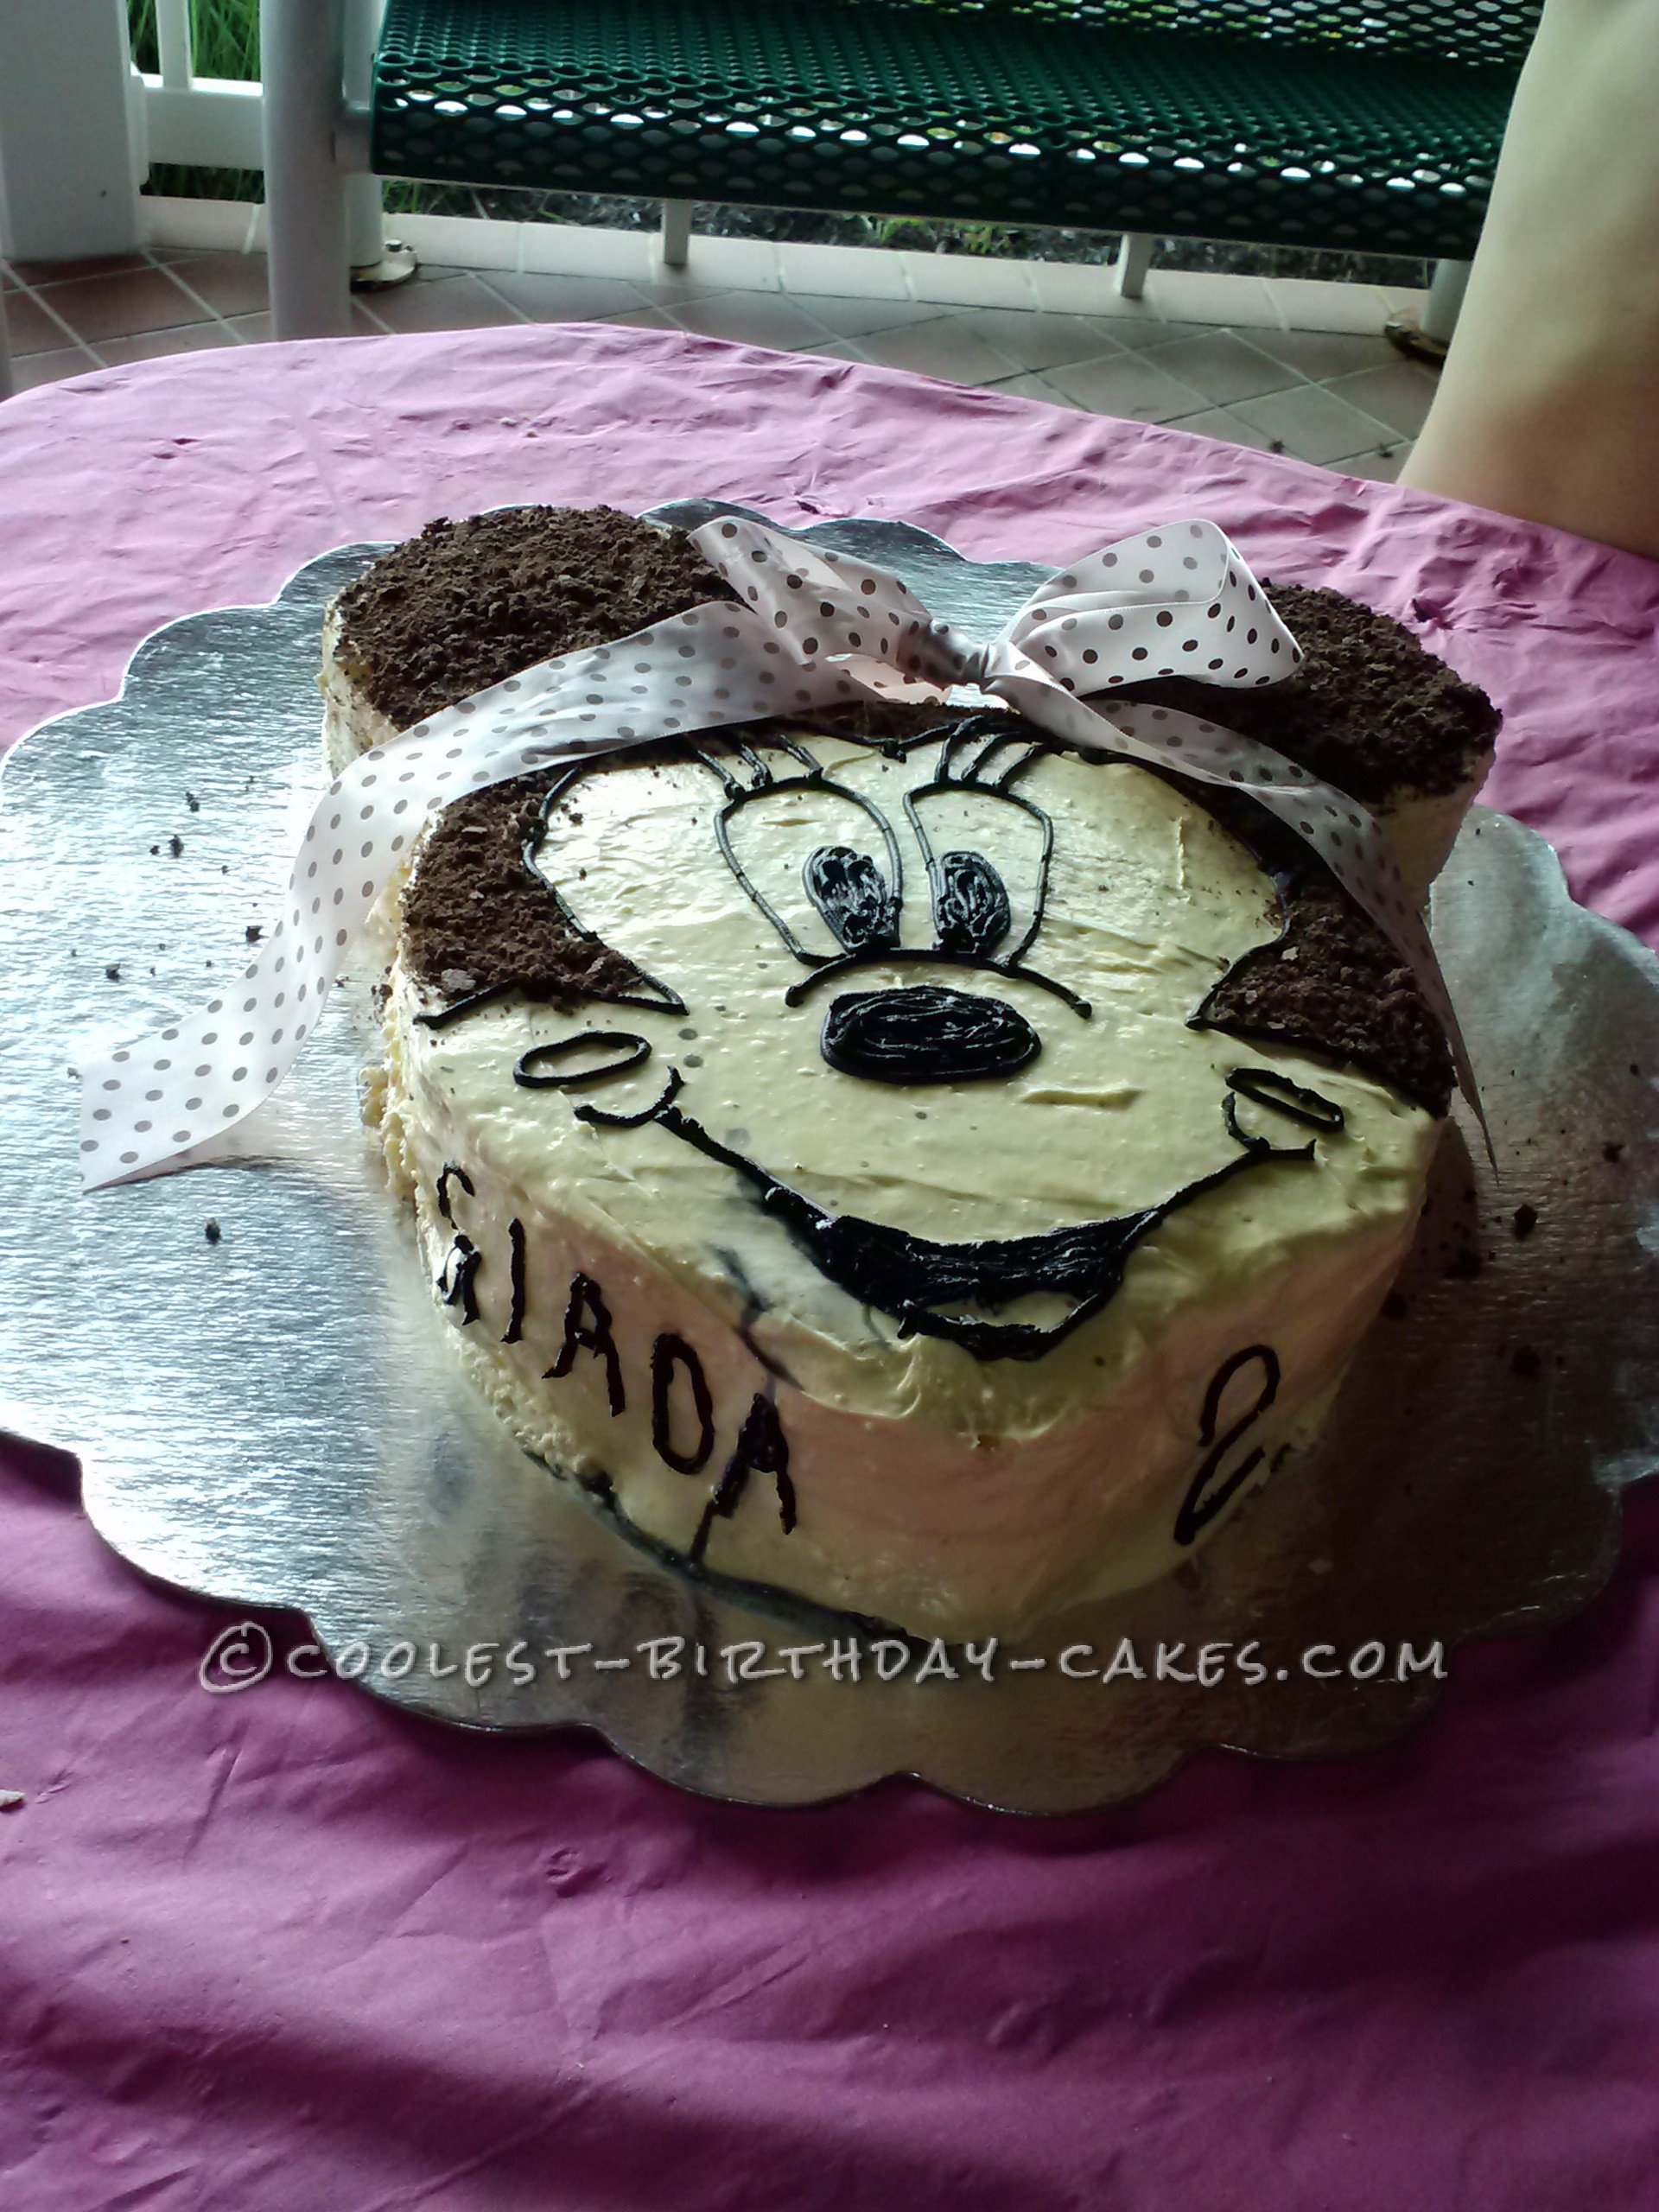 Coolest Minnie Mouse Cake